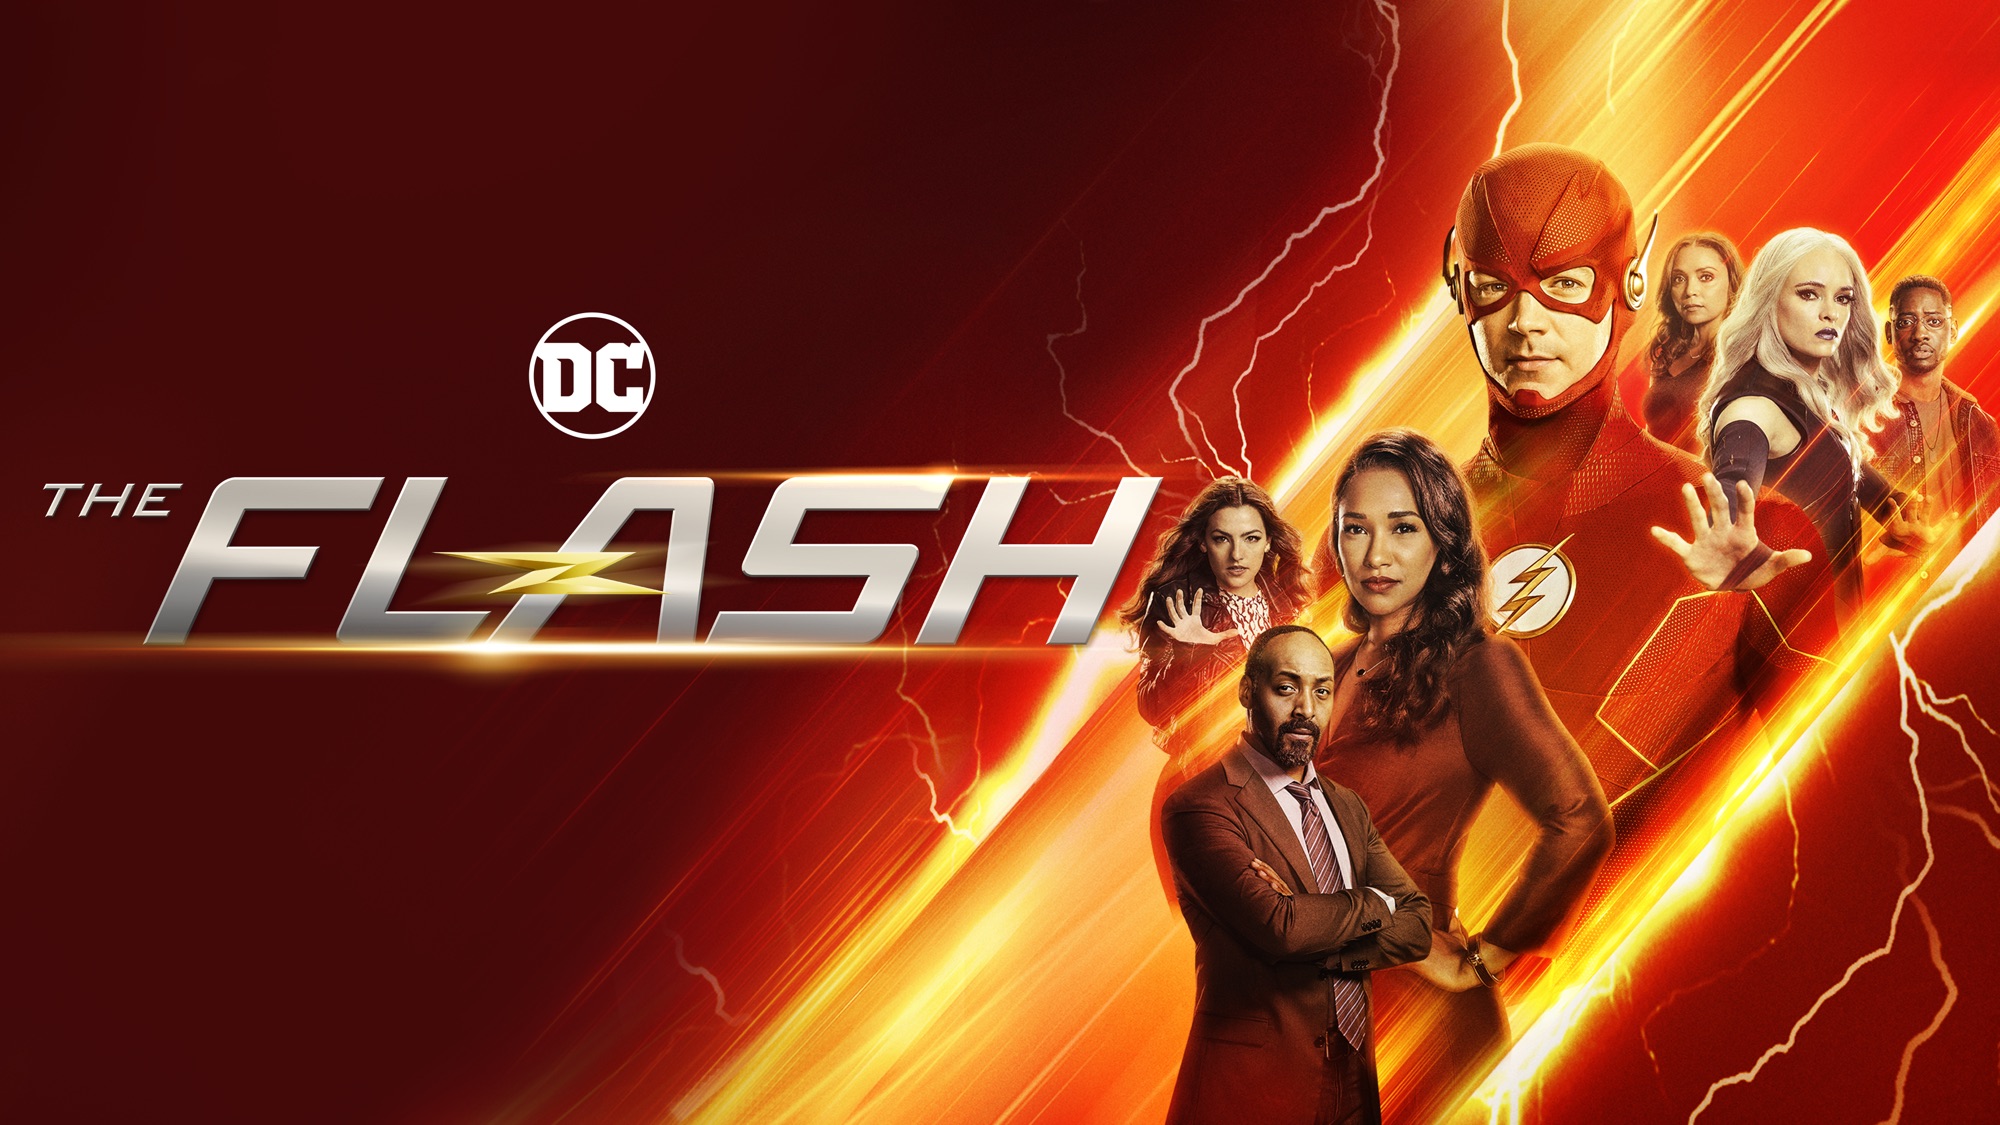 TV Show The Flash 2014 2000x1125